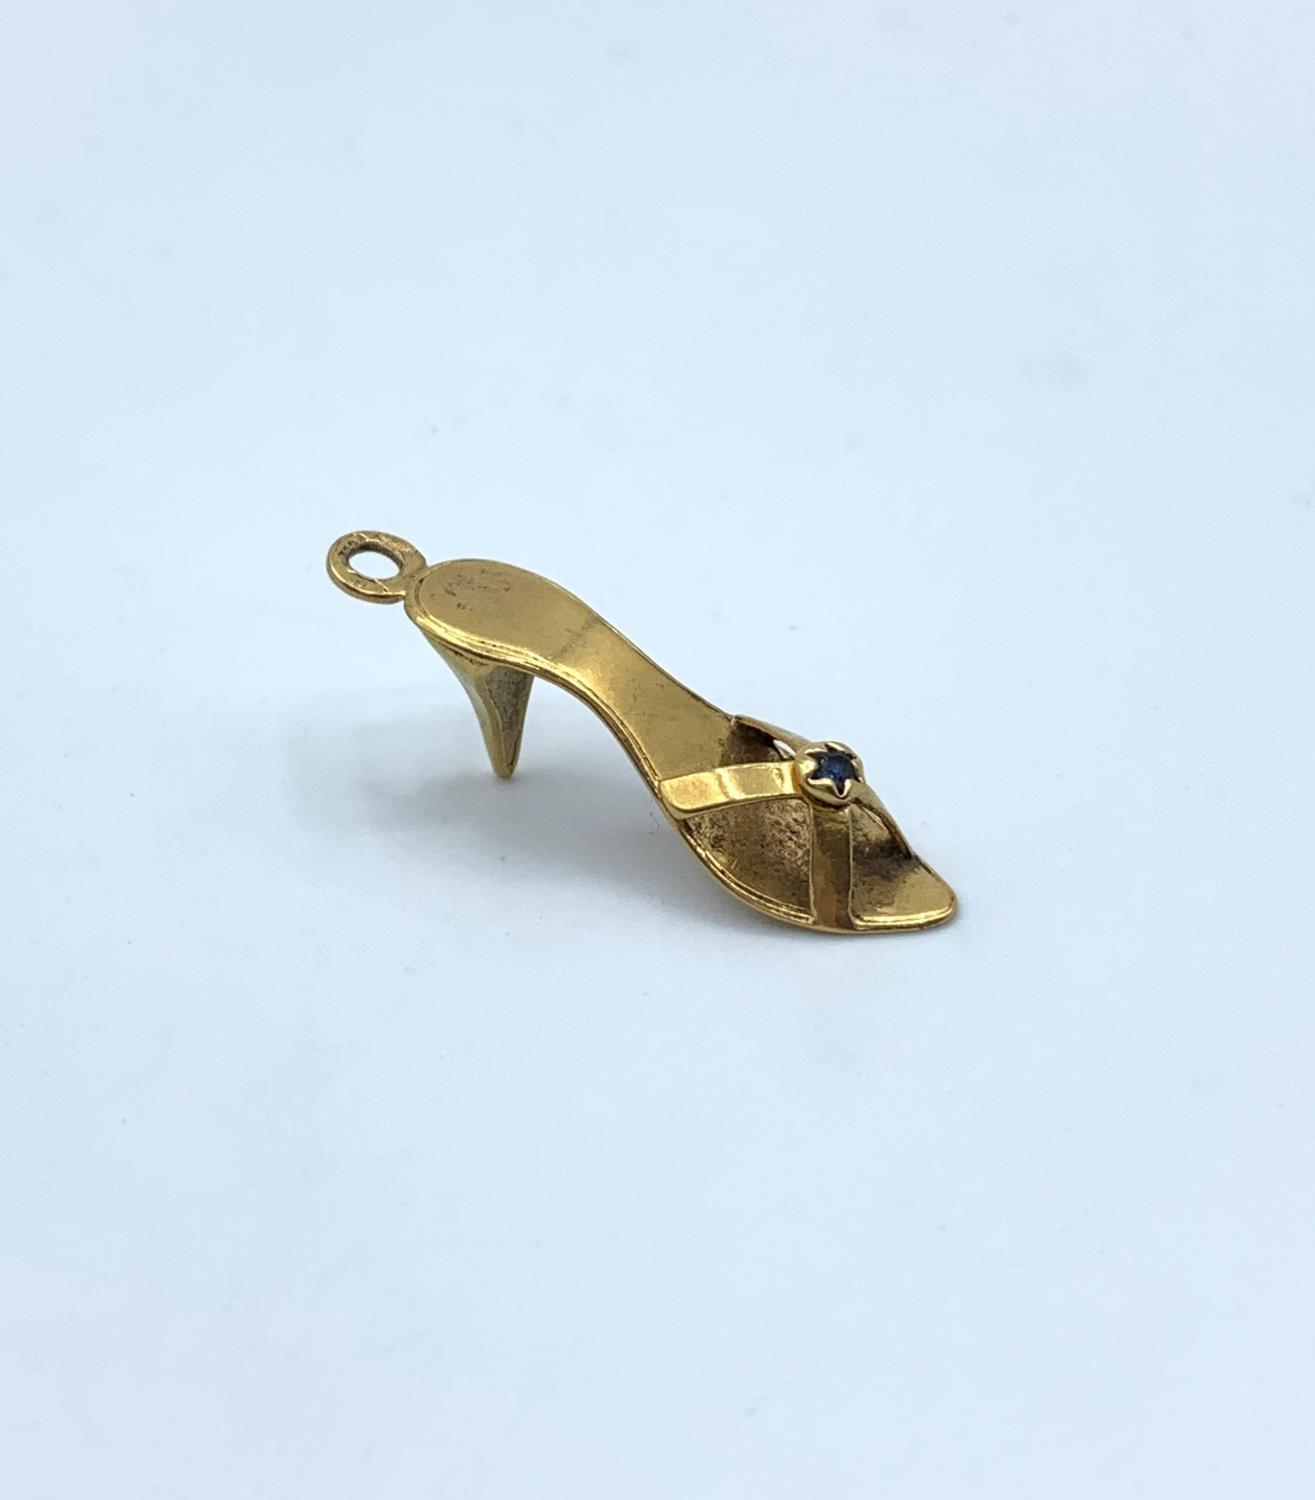 9ct Gold Shoe Charm/Pendant, weight 2.7g and 3cm long - Image 2 of 6